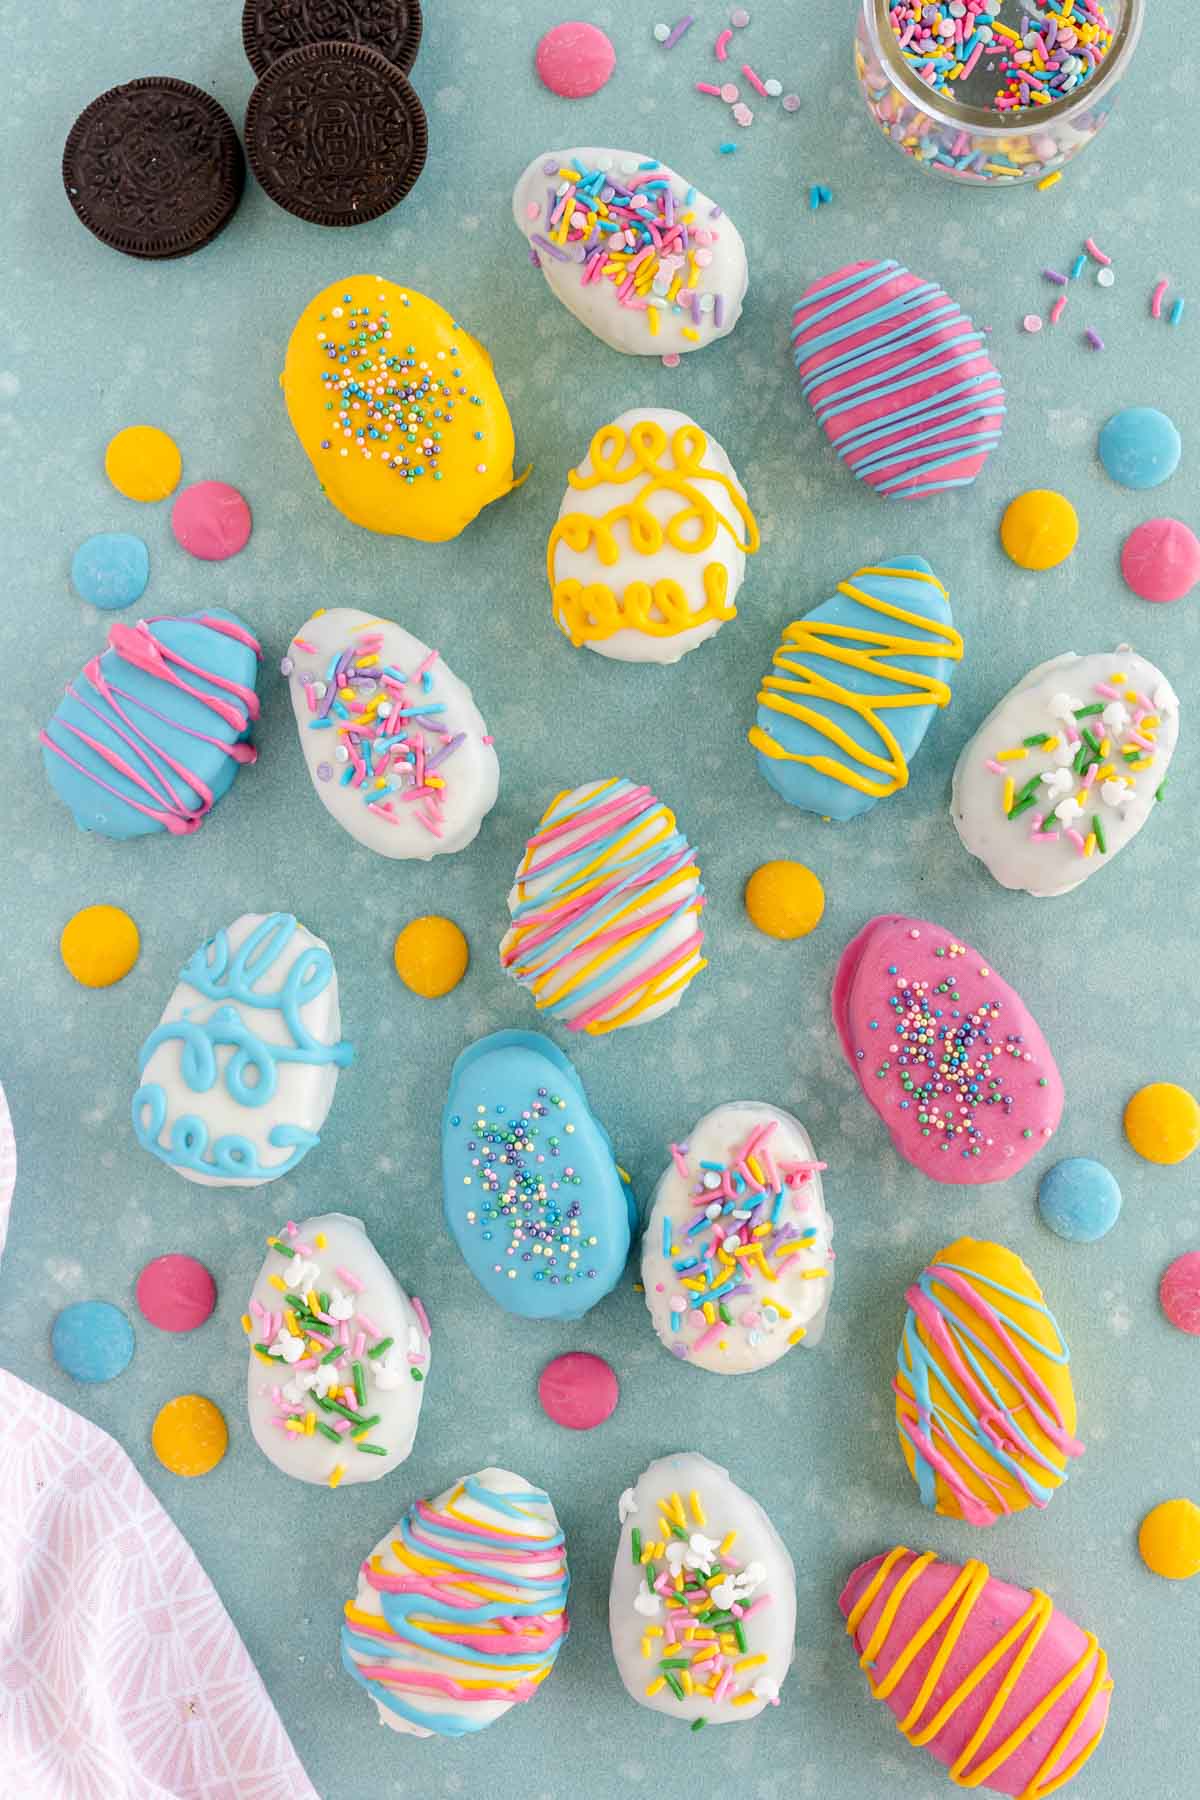 Oreo Easter eggs decorated and laying on a blue background